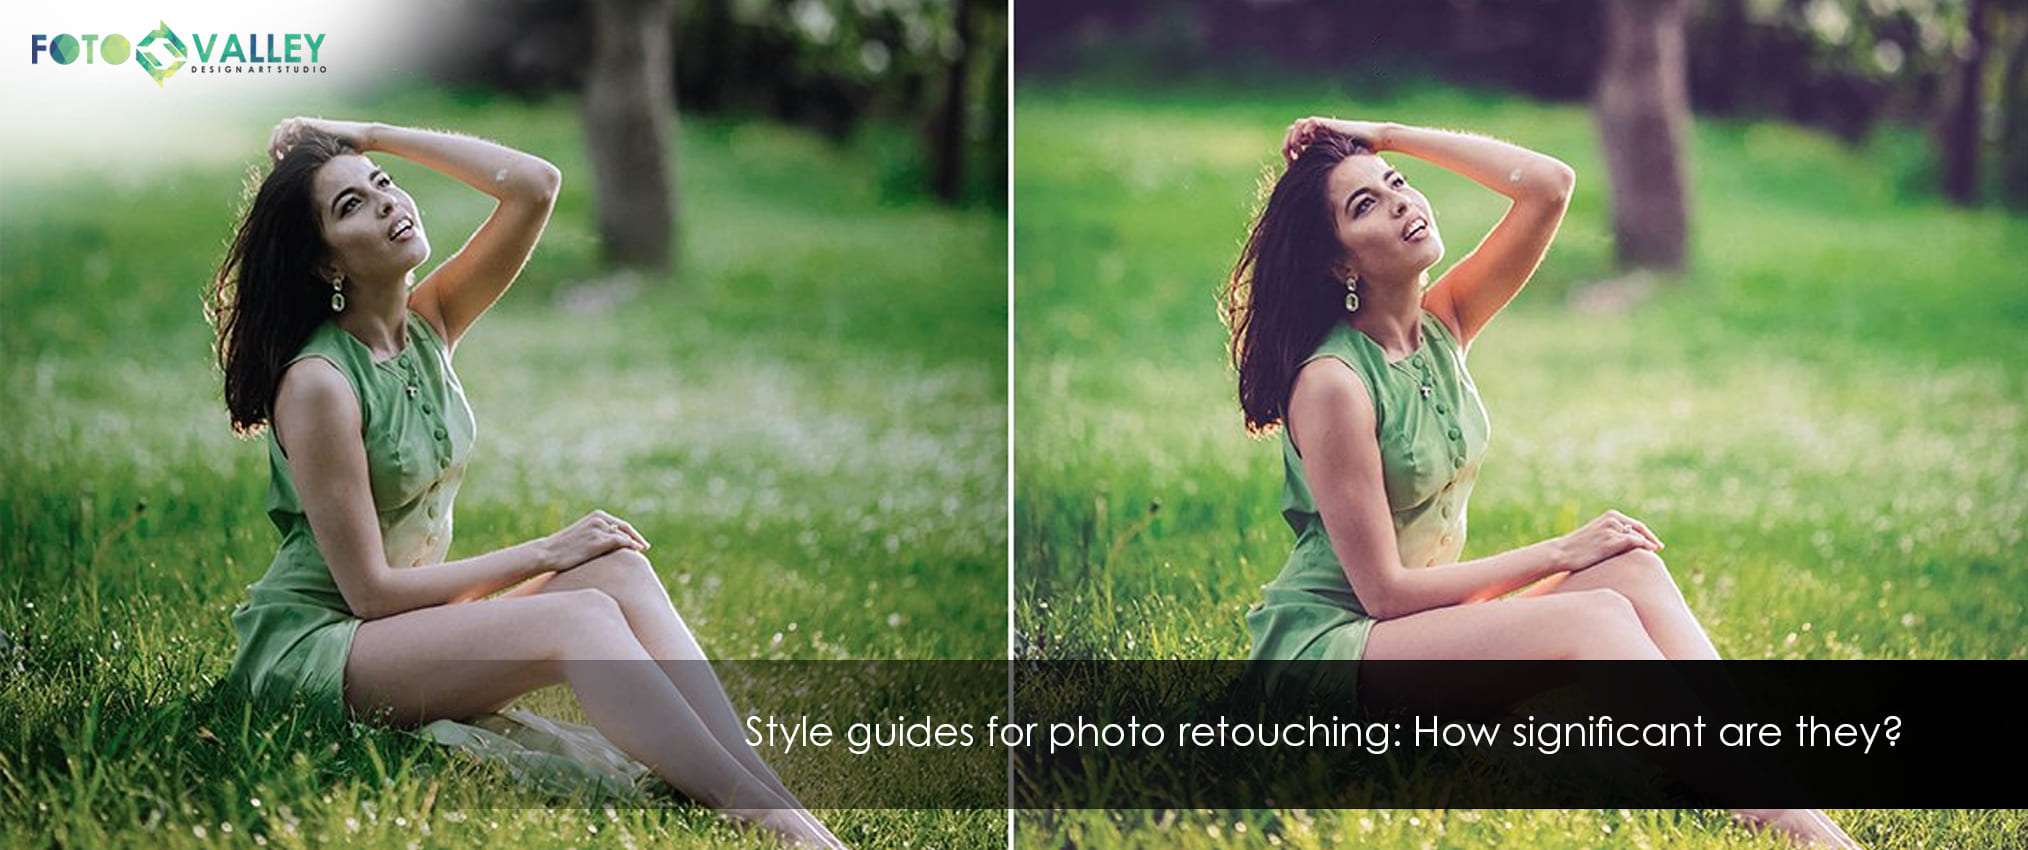 Style guides for photo retouching: How significant are they?